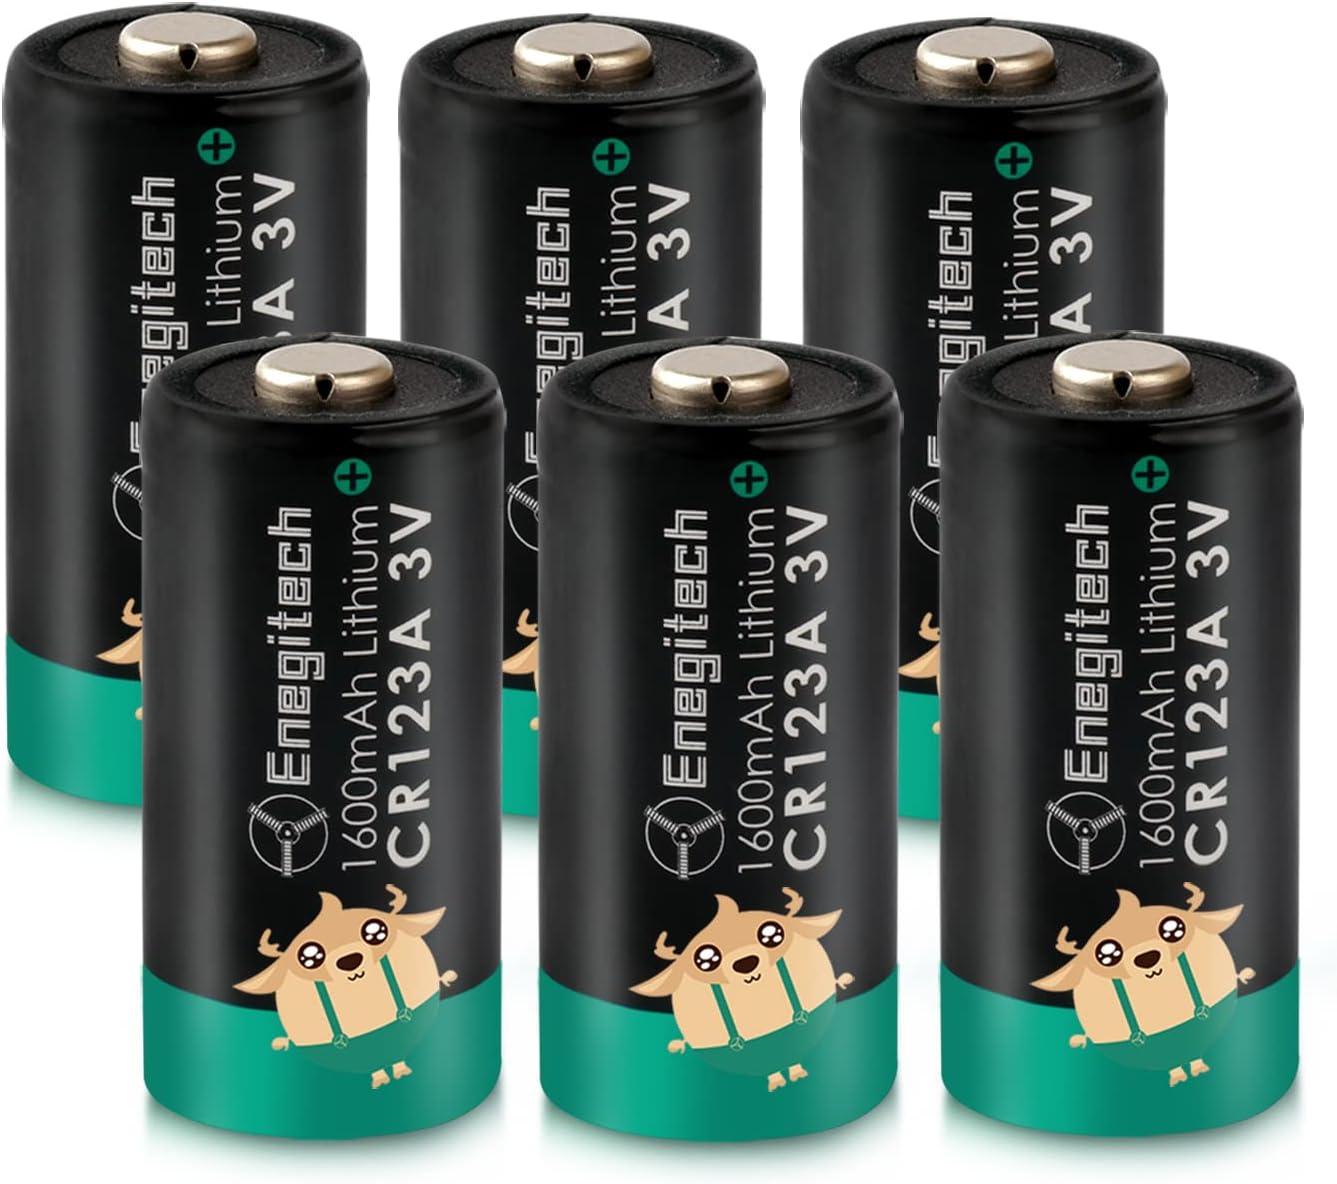 Upgraded] CR123A 3V Lithium Non-Rechargeable Batteries 1600mAh - 6 Pa –  Enegitech